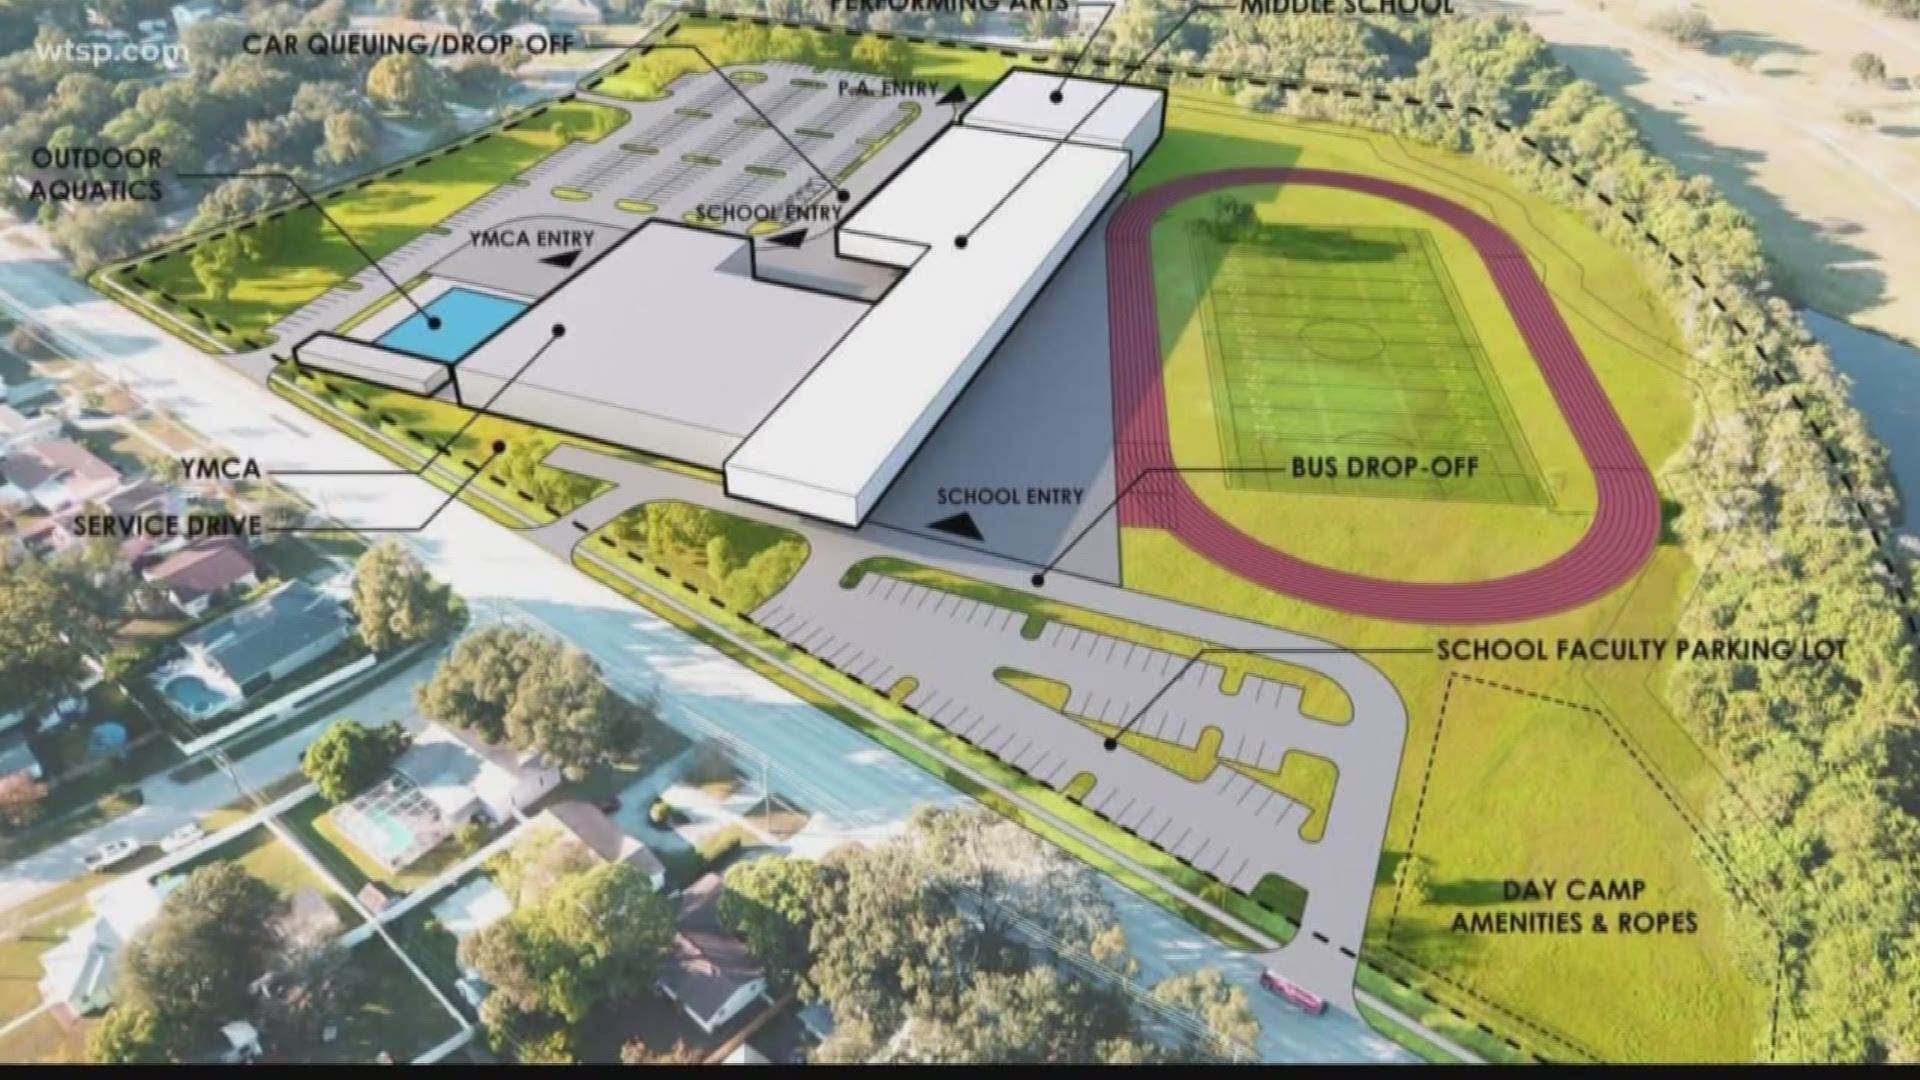 You can expect some big construction projects for Pinellas County Schools during the next couple of years.